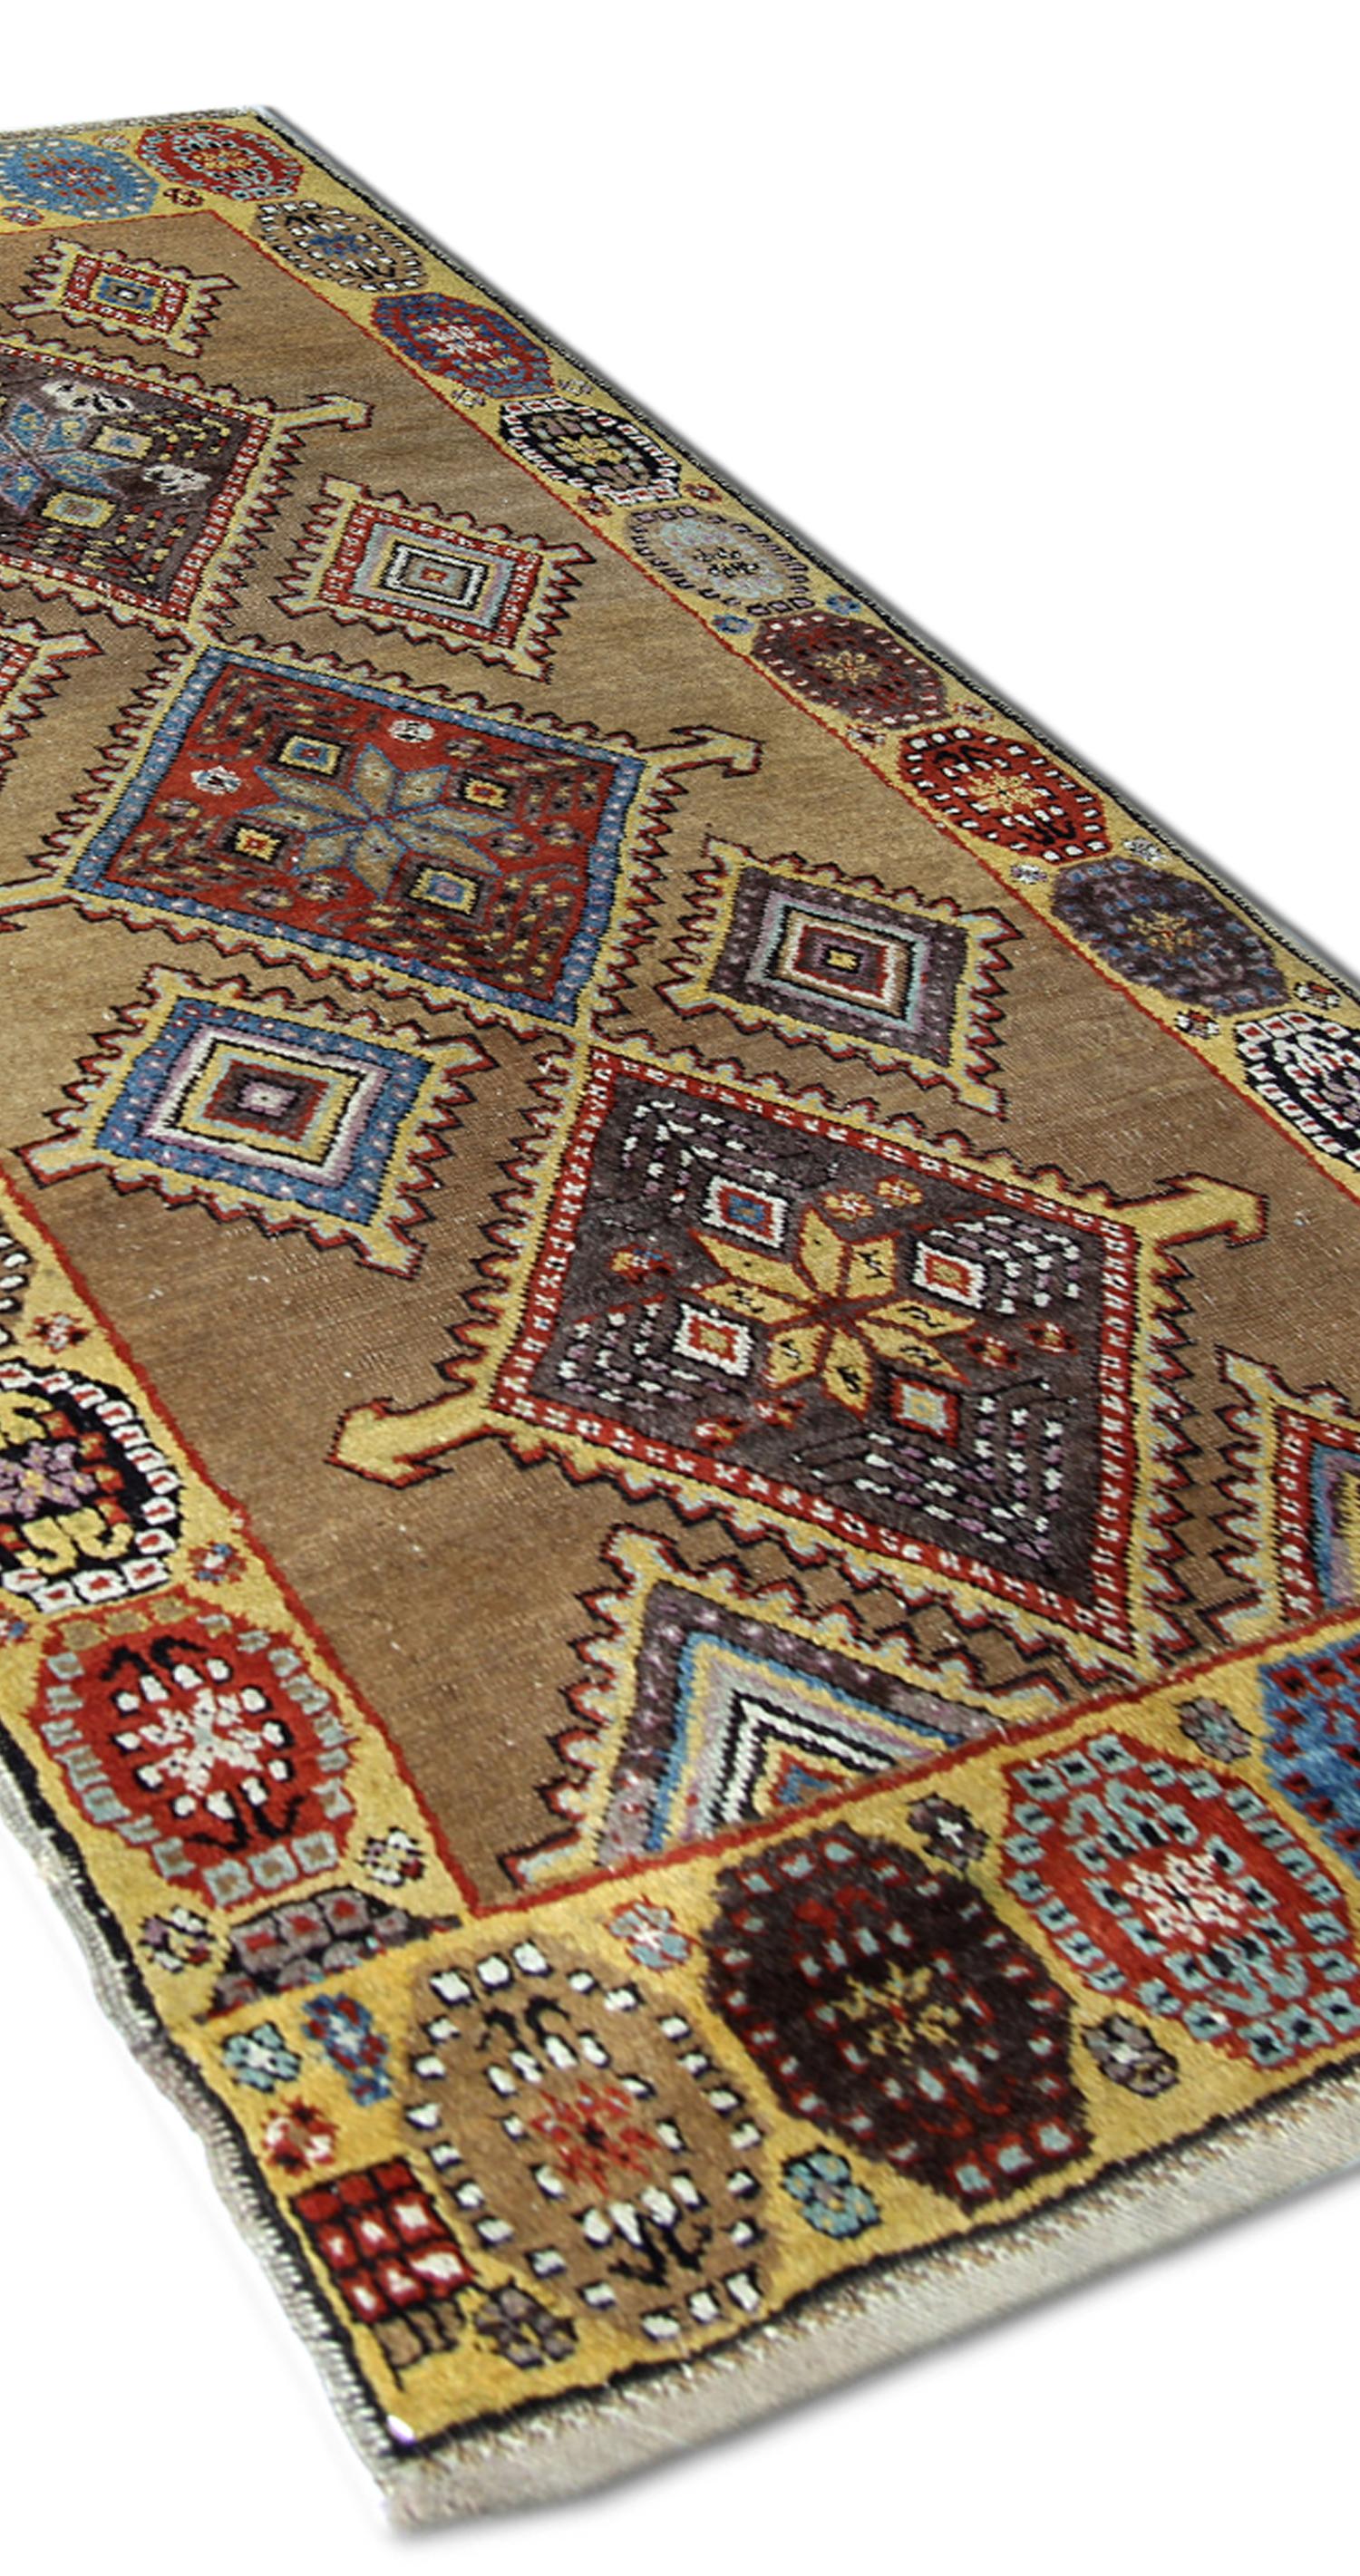 This fine wool area rug is an Antique are rug woven by hand circa 1880. This design features three large central medallions woven on a beige background in accents of blue red and brown. This is then framed by a highly-decorative repeating pattern